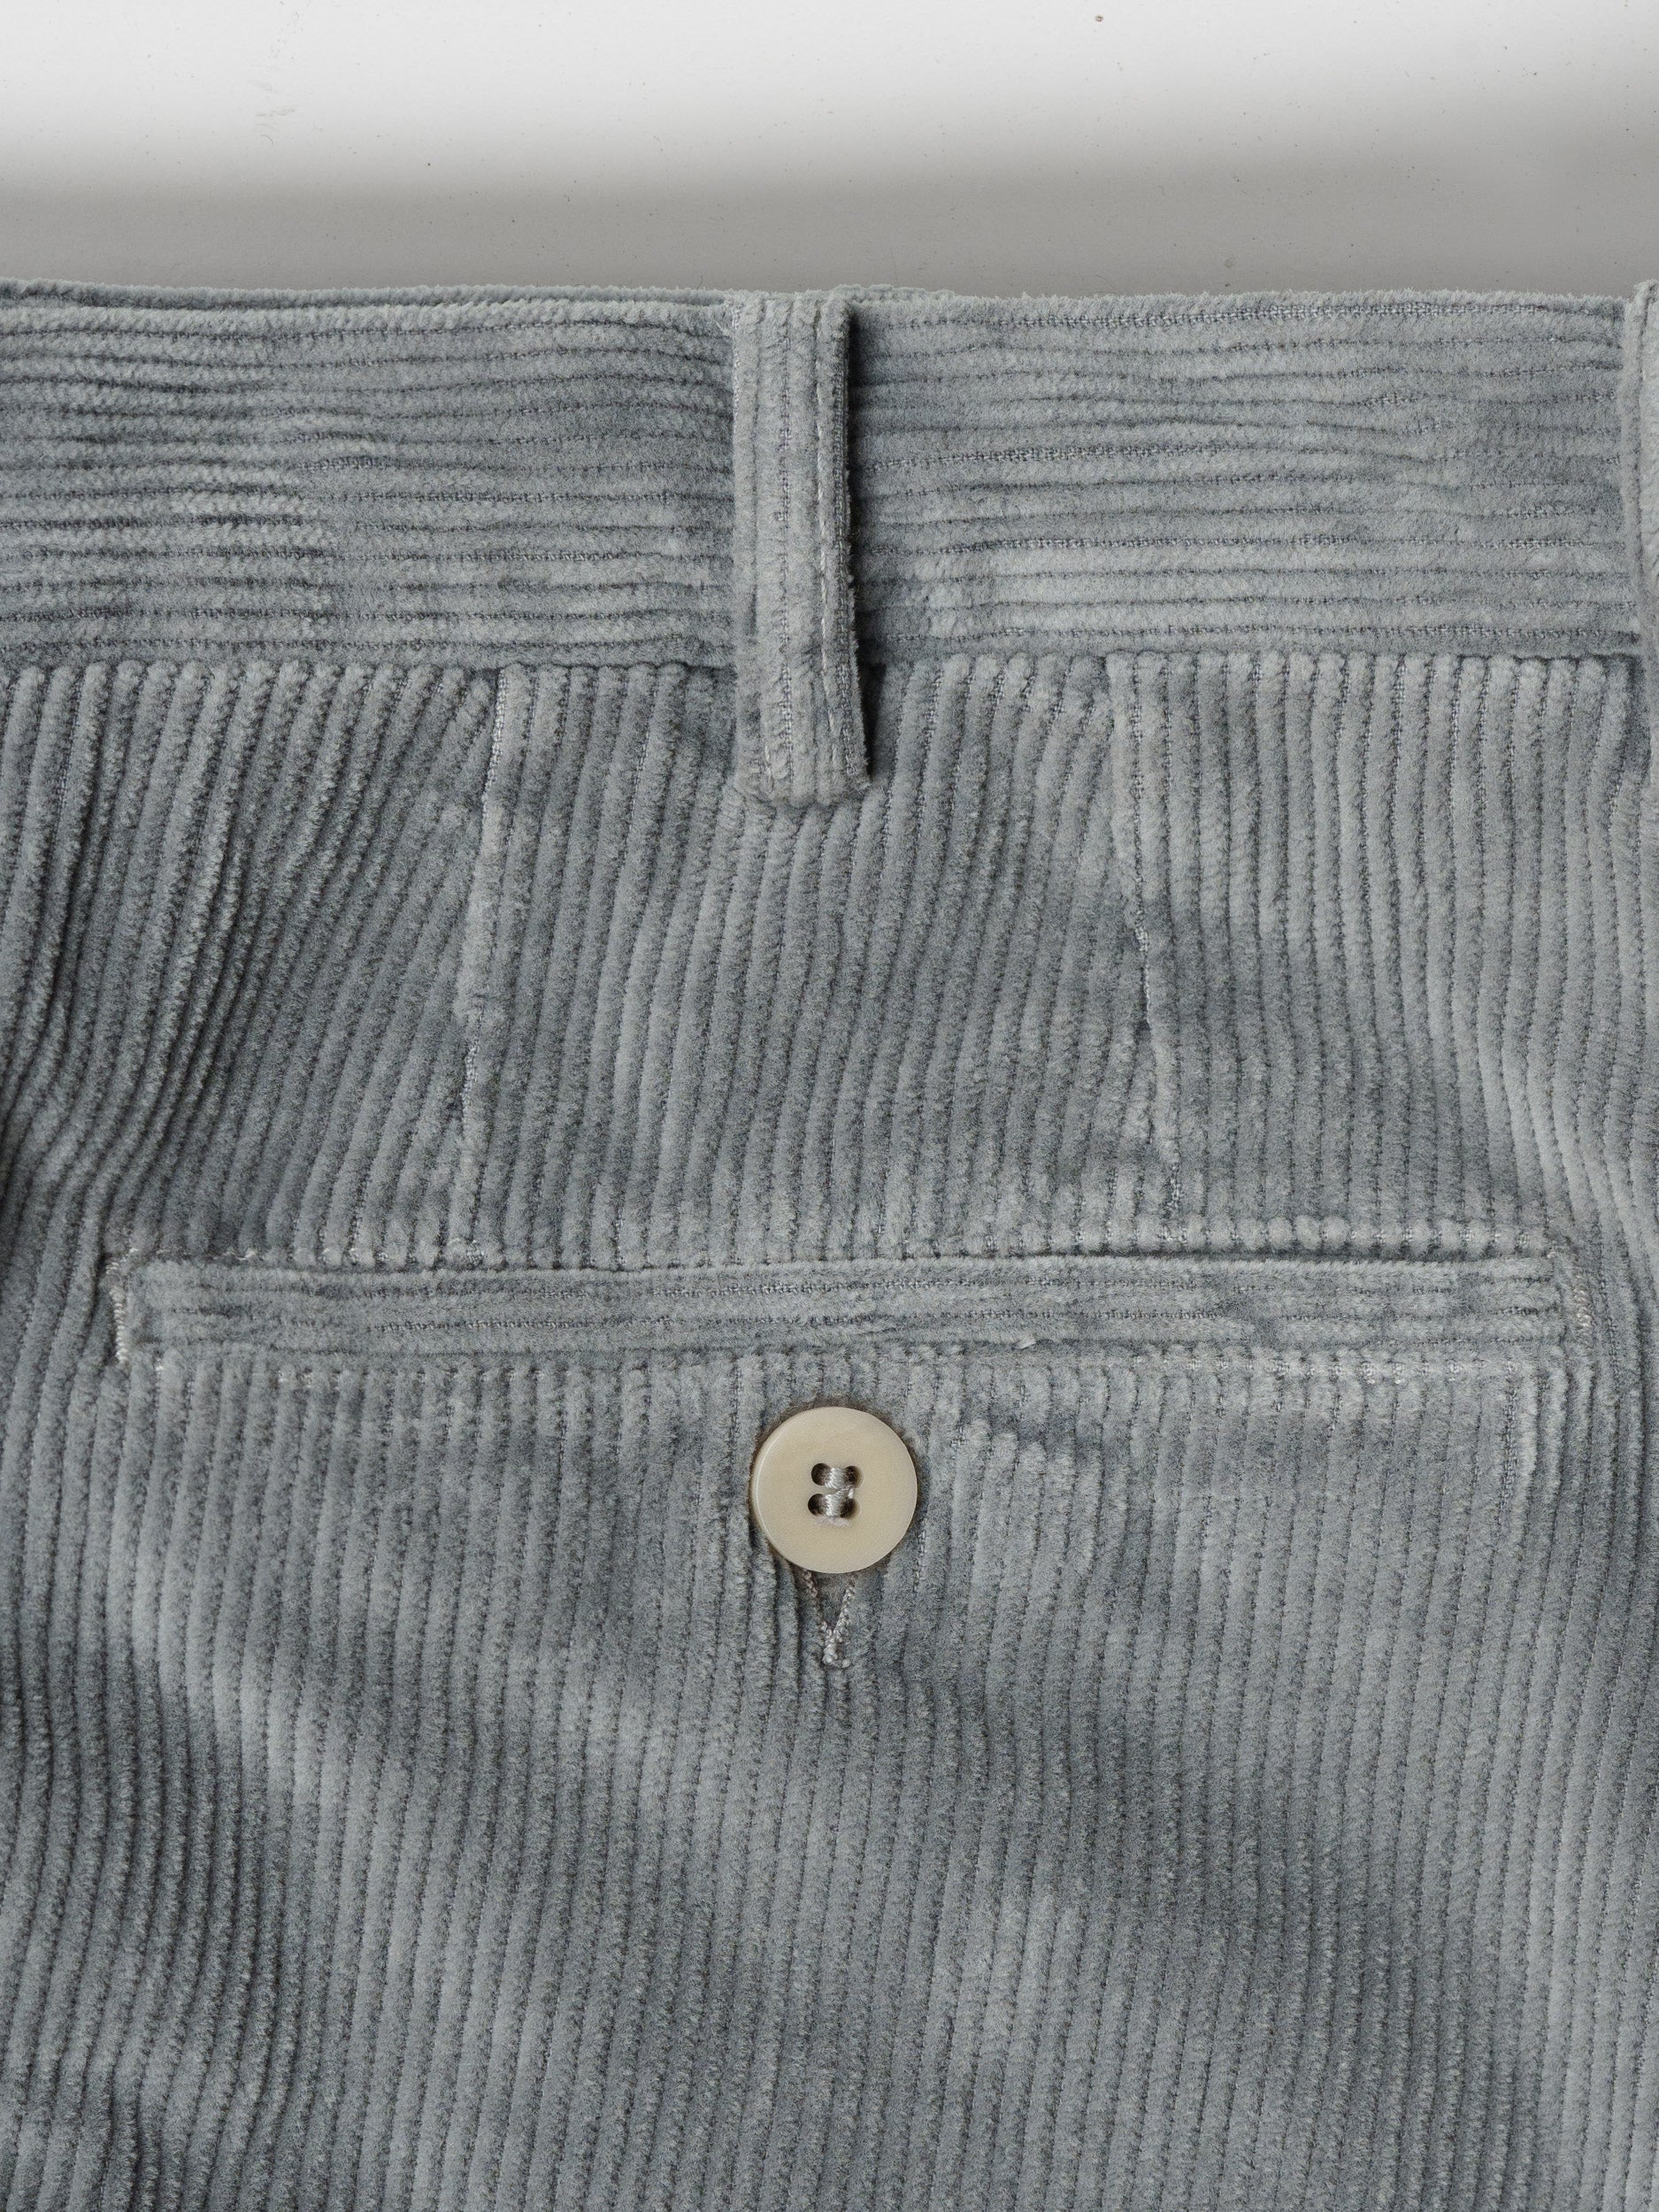 Dark Gray Corduroy Trousers : Made To Measure Custom Jeans For Men & Women,  MakeYourOwnJeans®